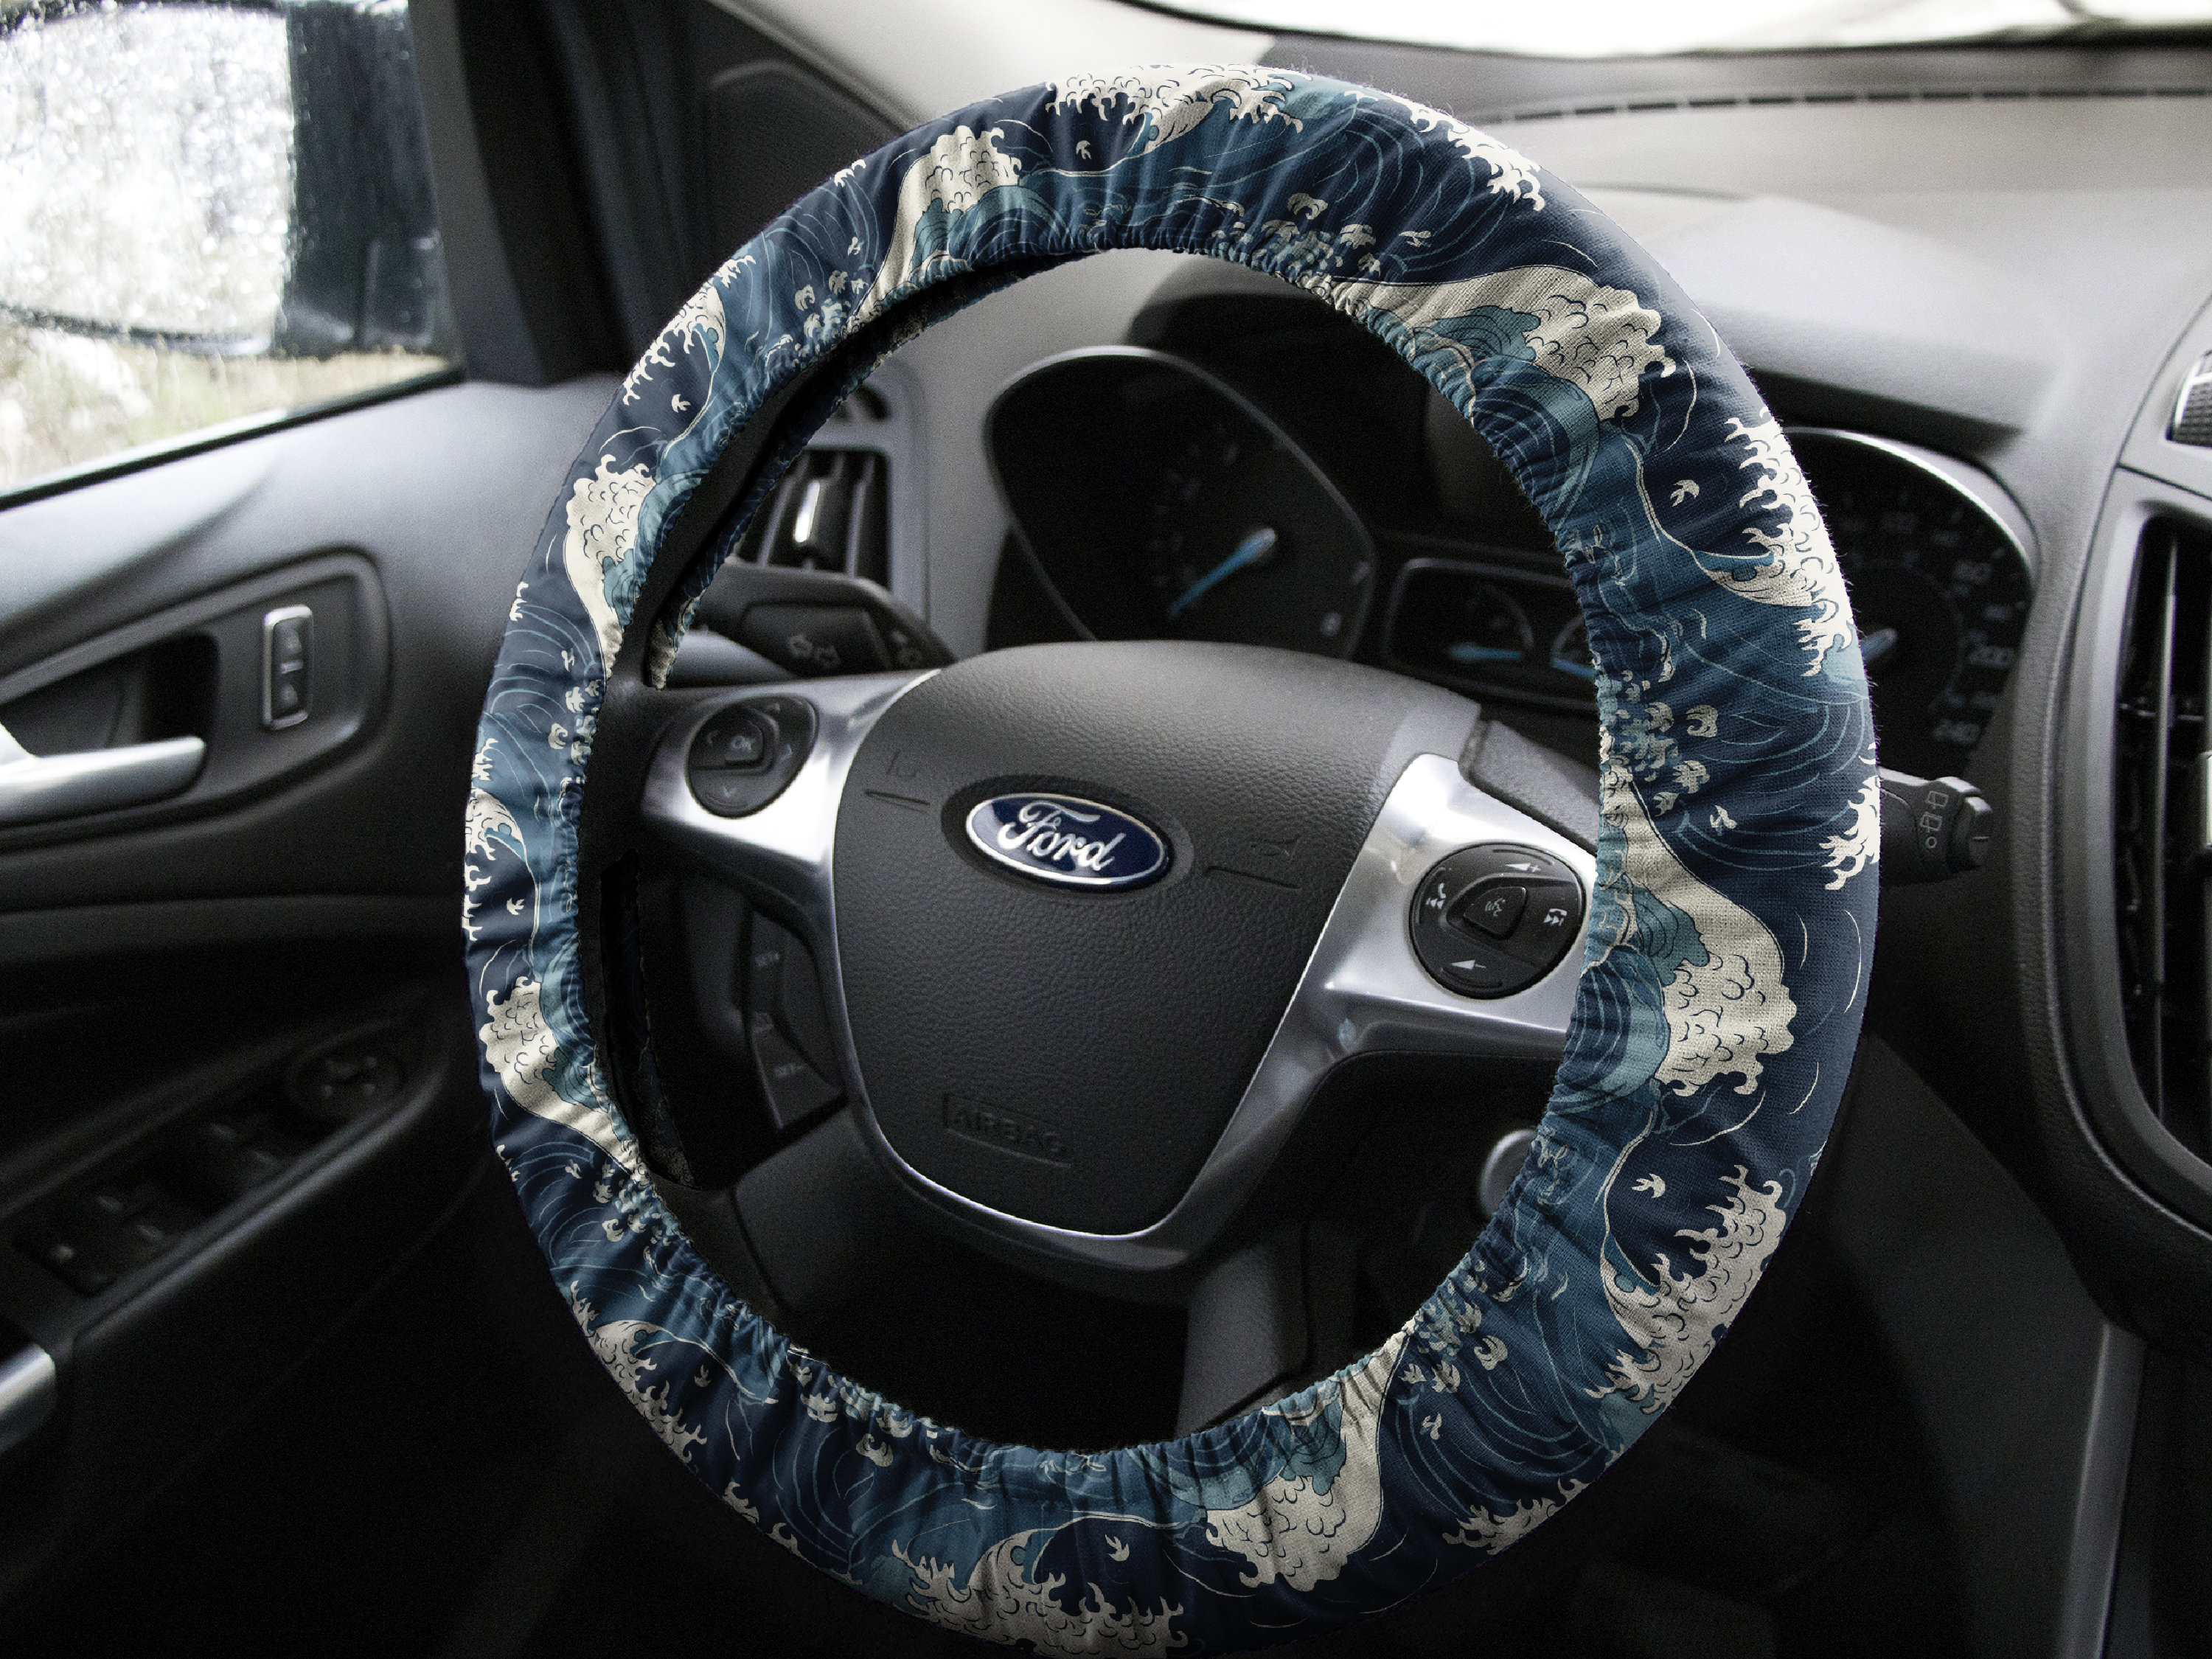 Discover Great Wave Steering Wheel Cover, Japan Art Car Accessories